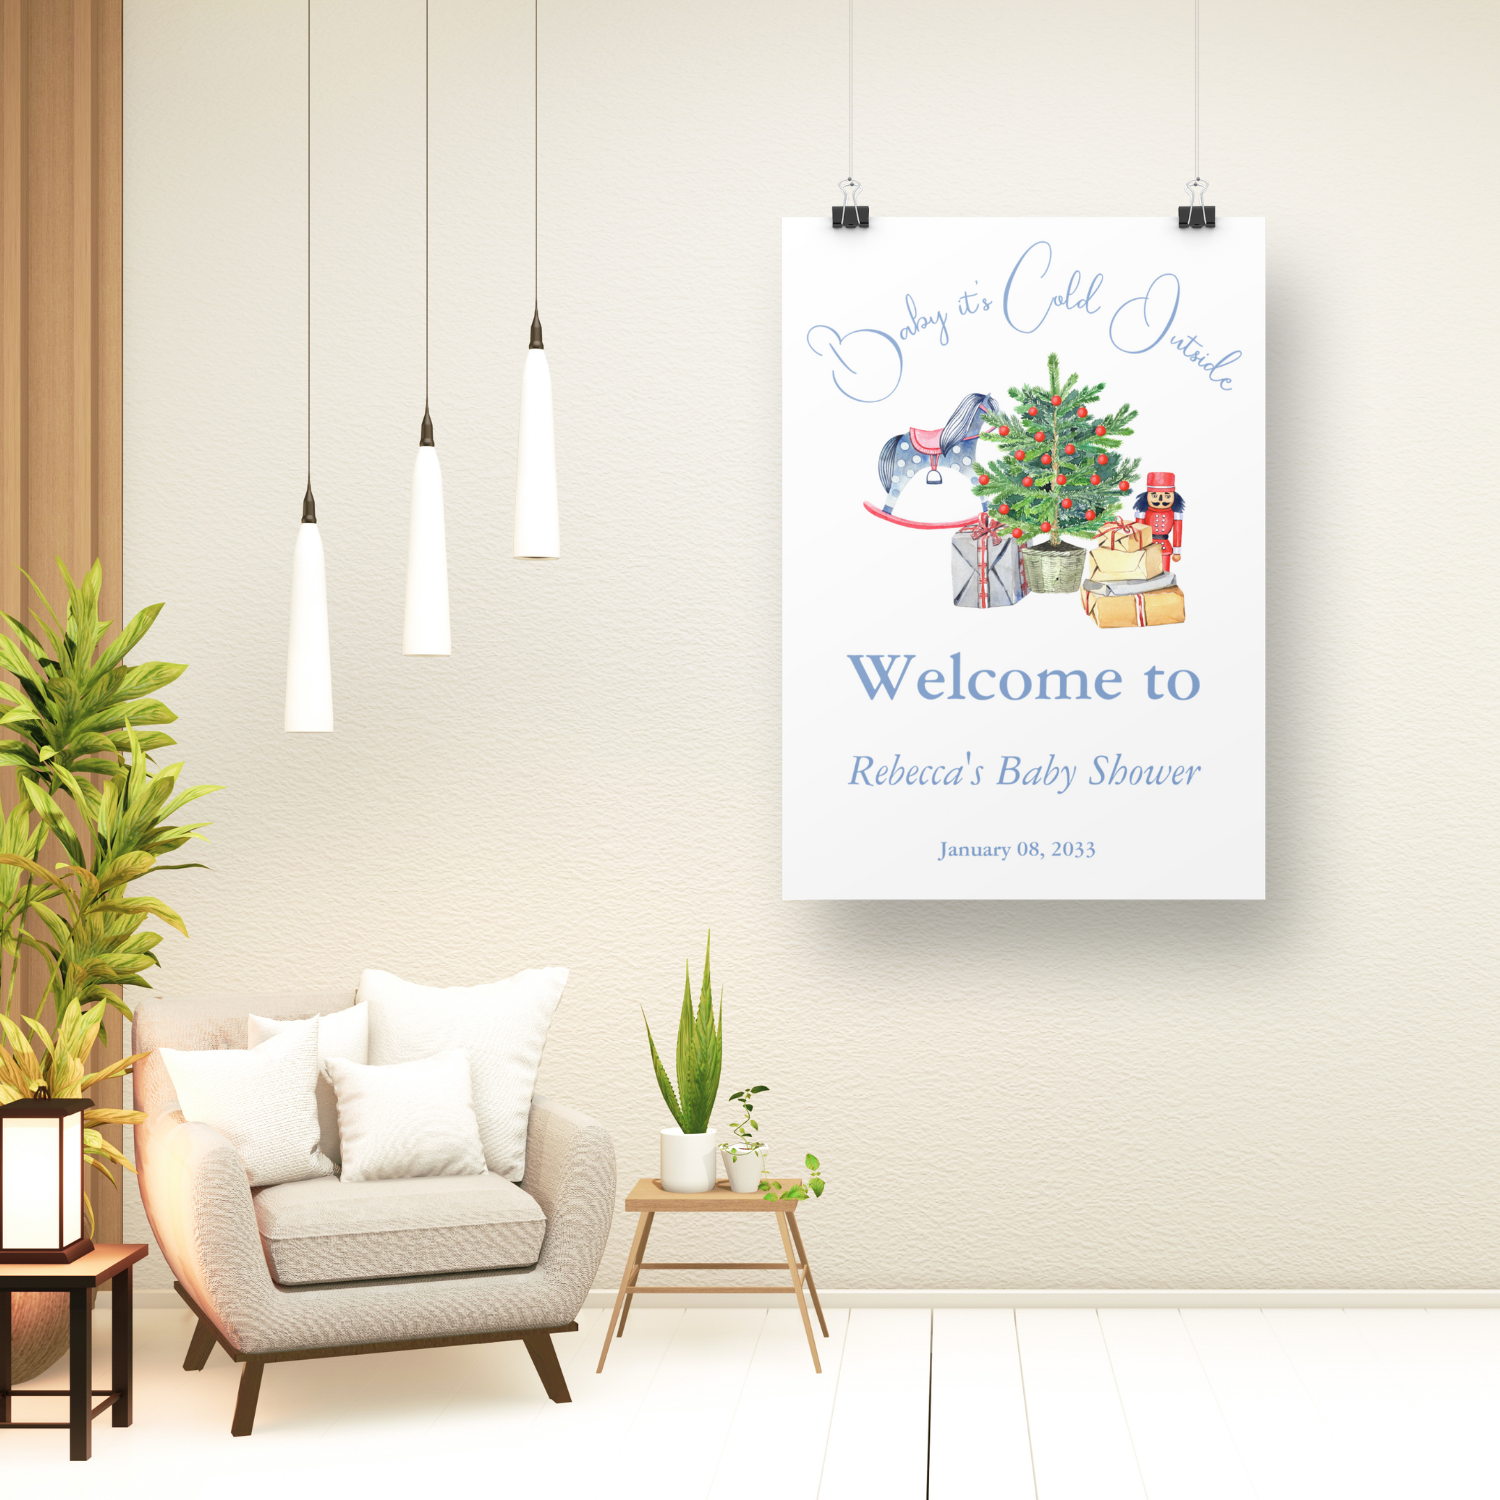 Watercolor Christmas tree with gift boxes, nutcracker and wooden horse in Blue colors for boy baby shower welcome sign